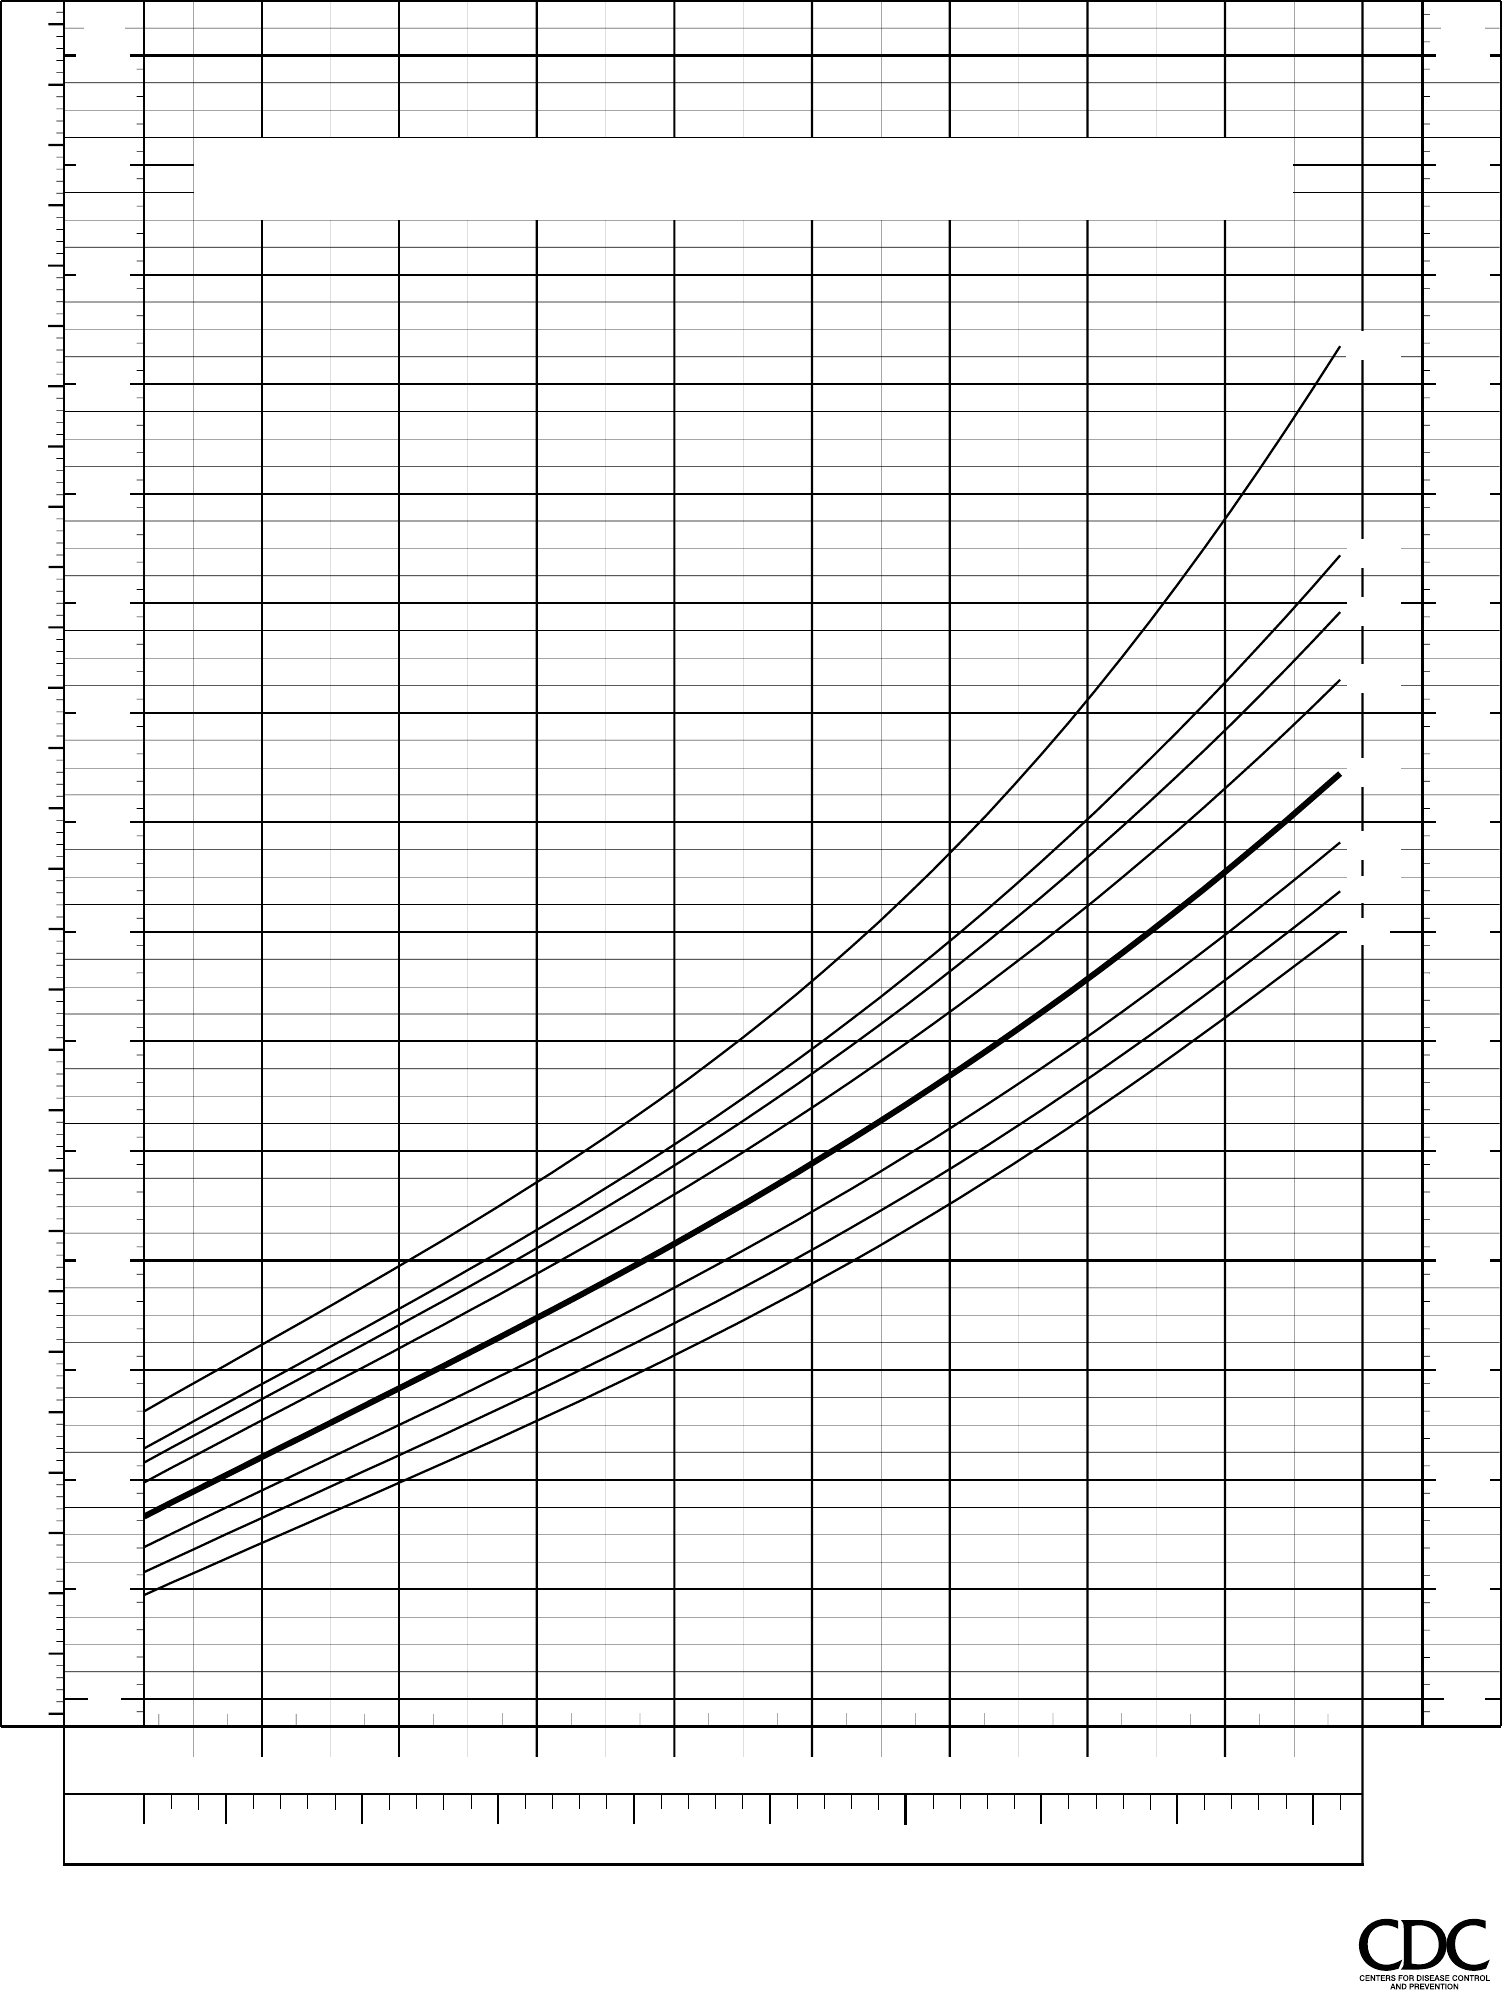 CDC Growth Charts - Edit, Fill, Sign Online | Handypdf